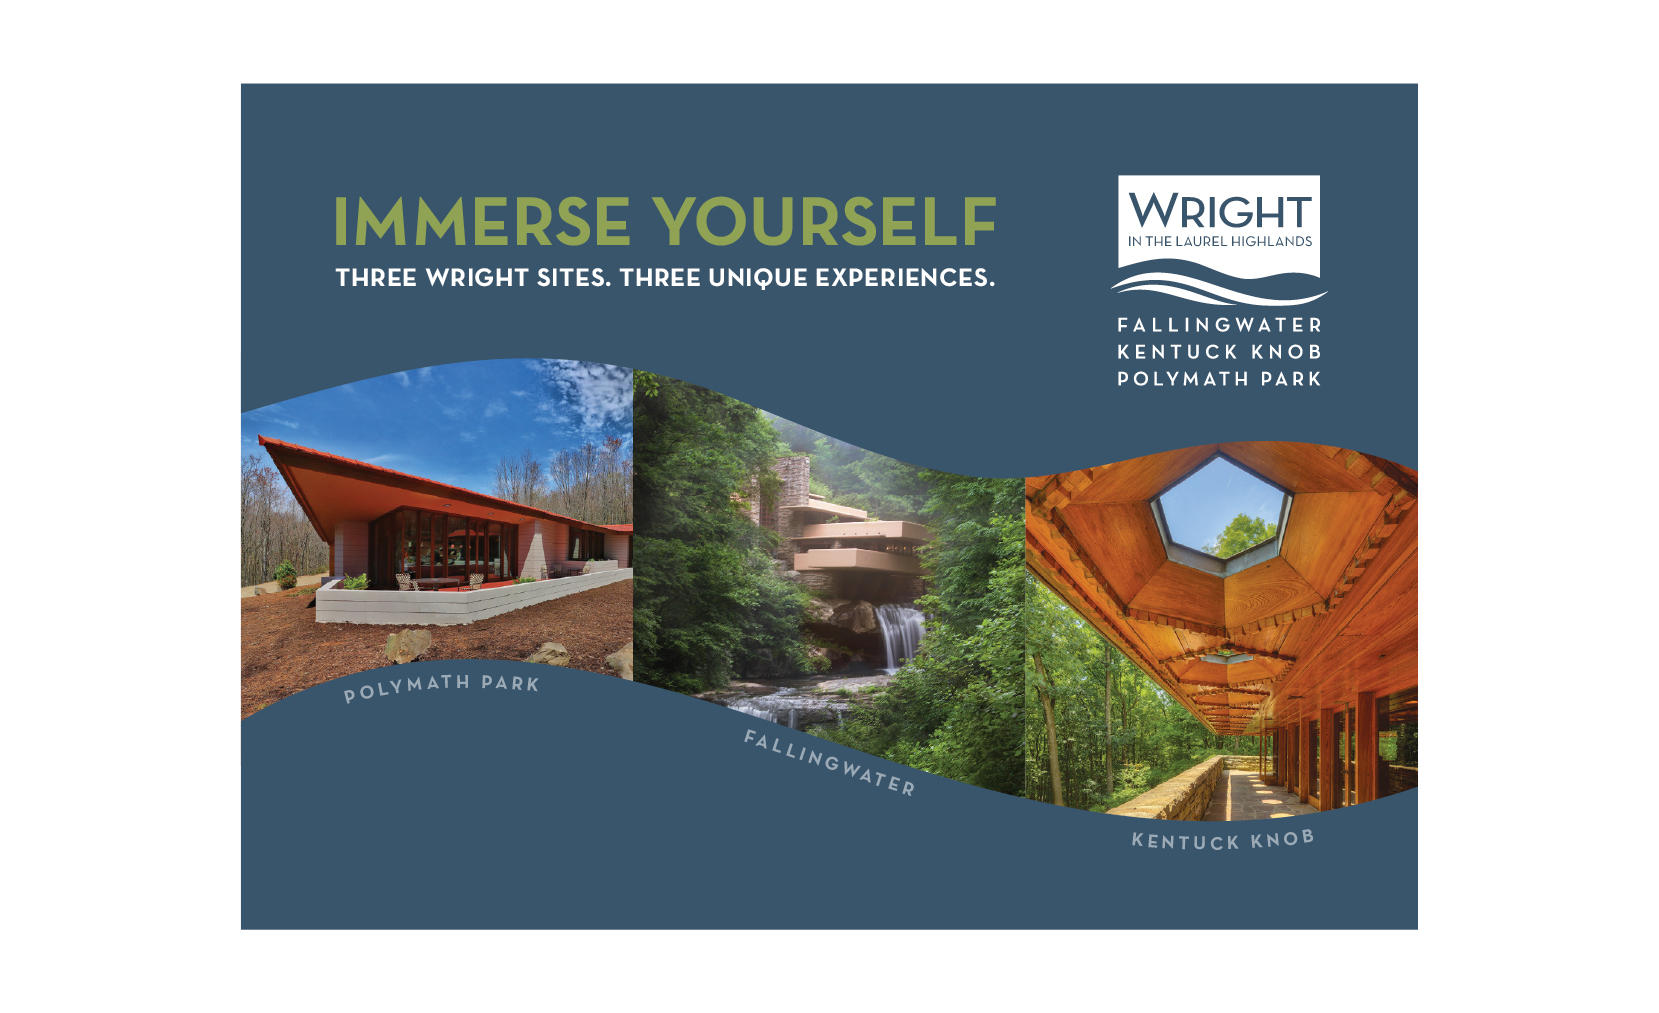 Wright in the Laurel highlands advertising